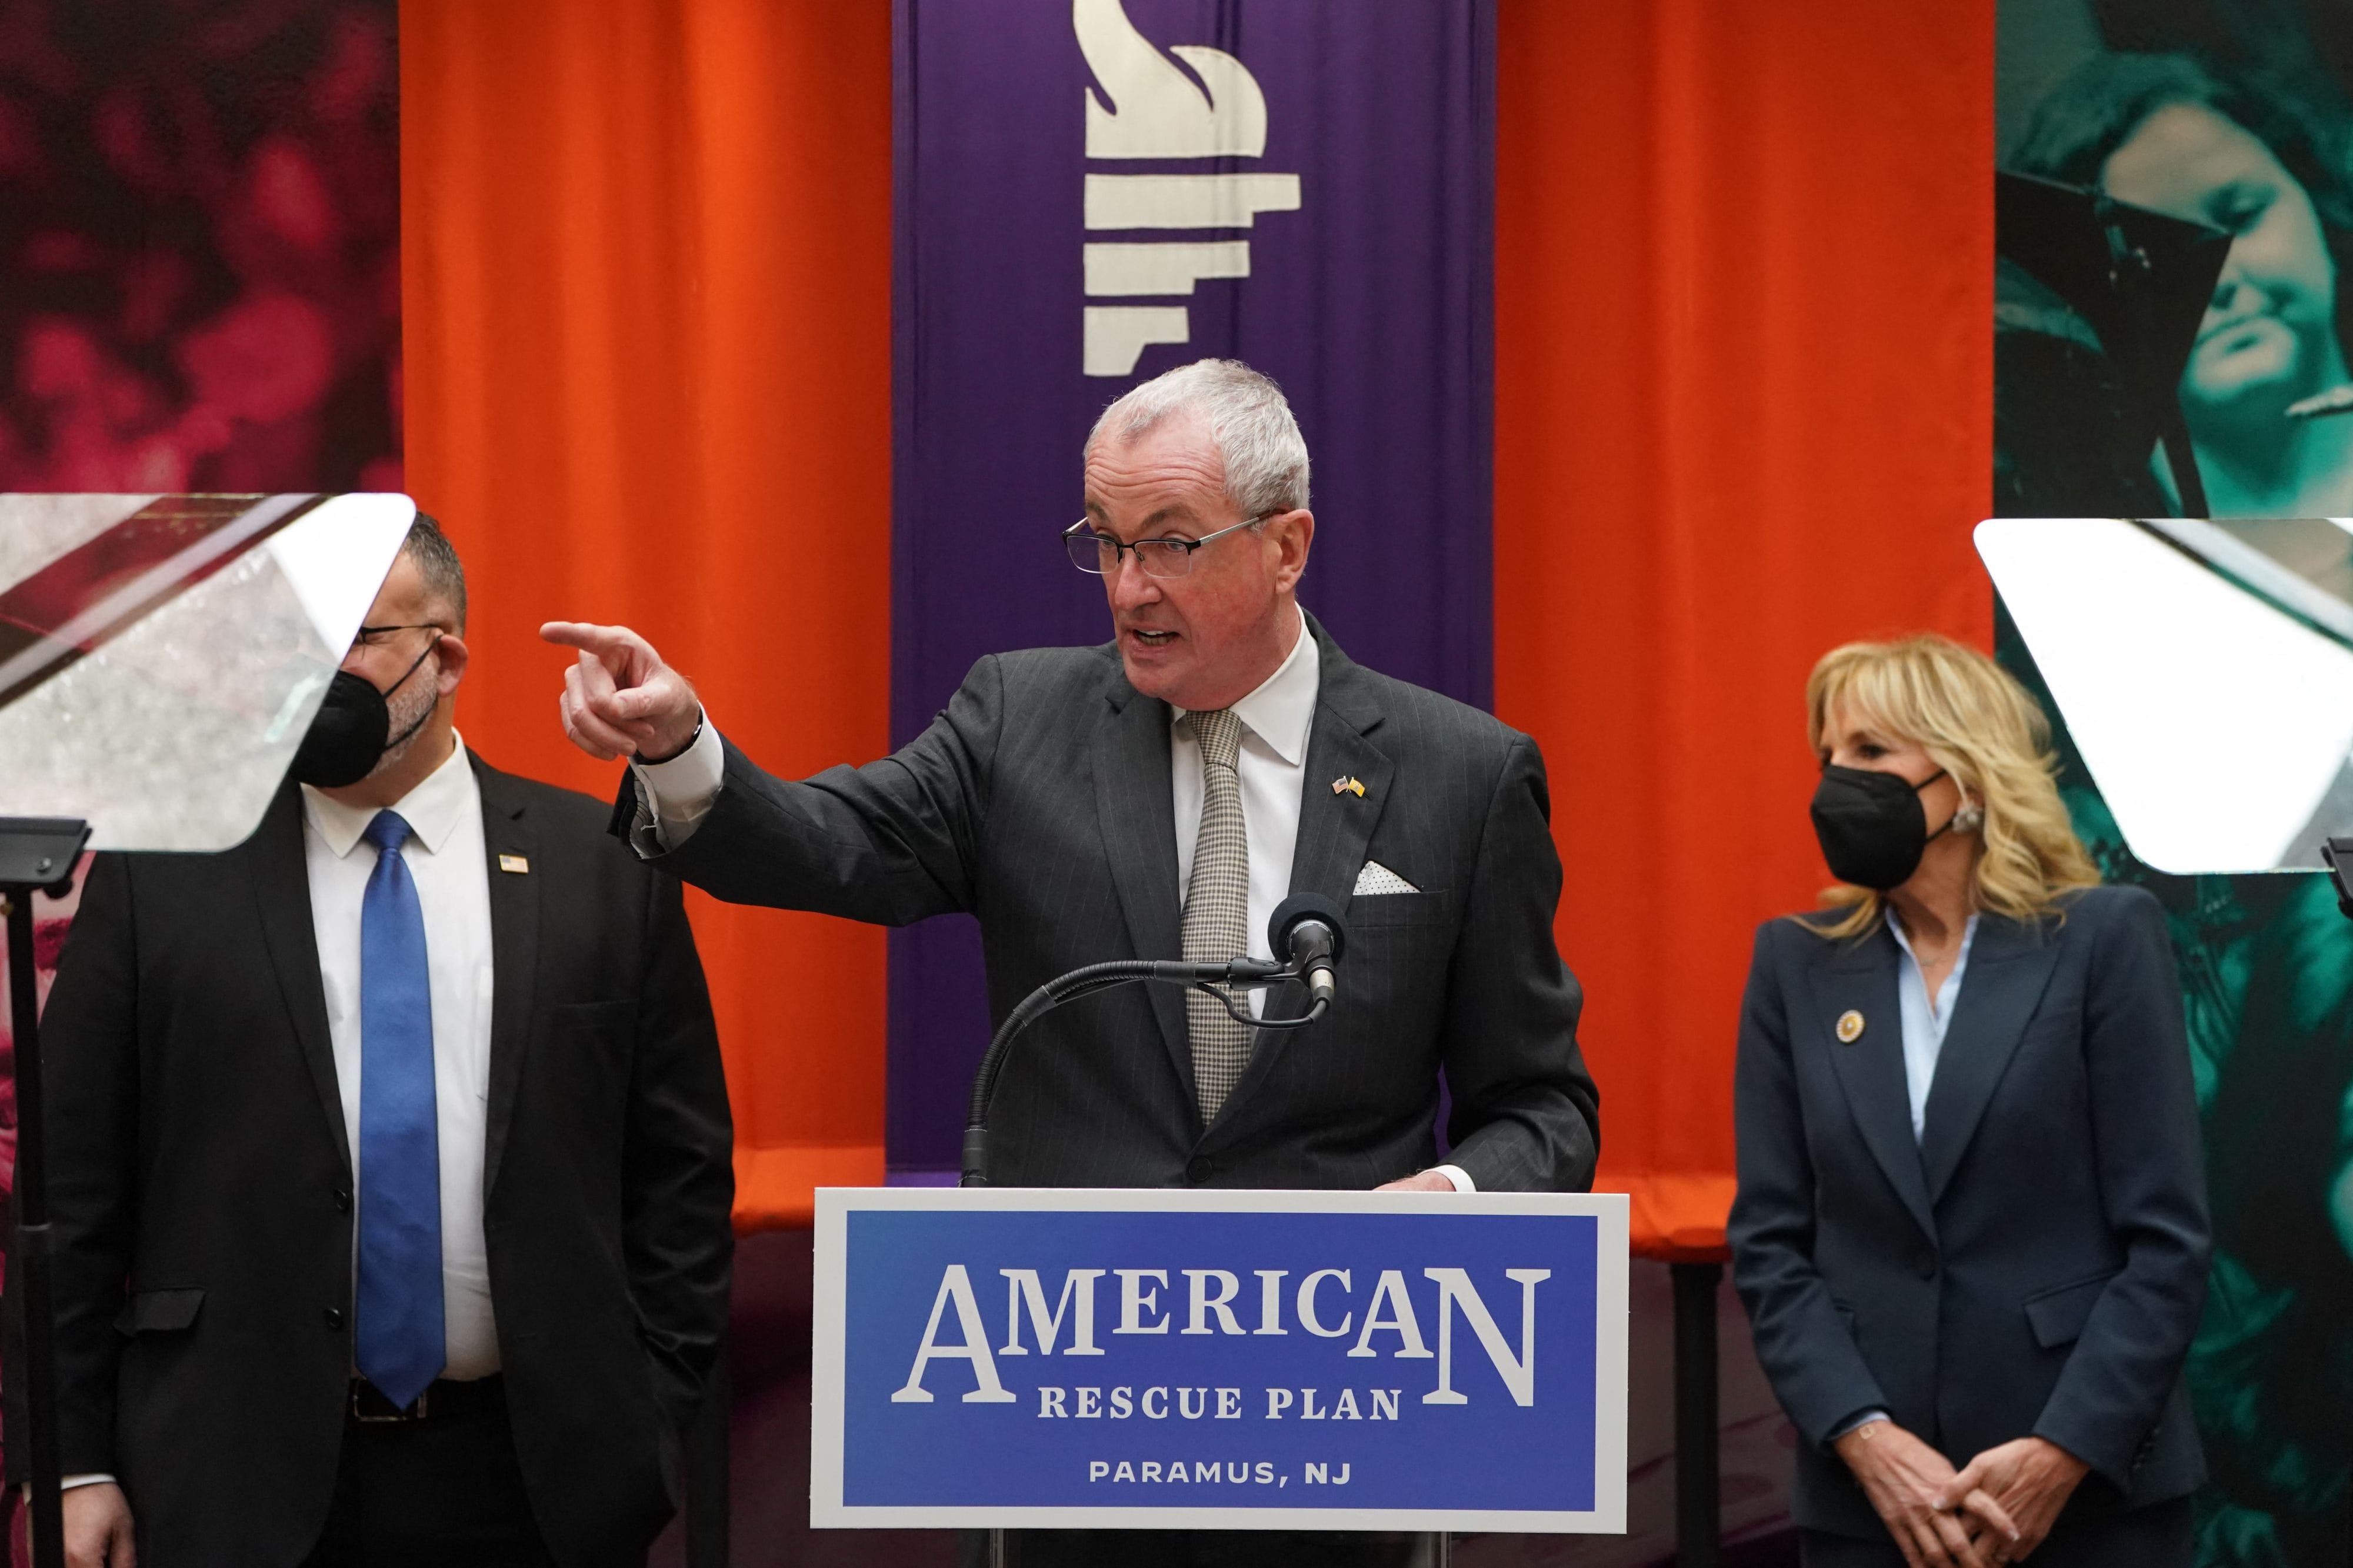 New Jersey Governor Phil Murphy points his finger and speaks to conference attendees. U.S. Secretary of Education Miguel Cardona and first lady Dr. Jill Biden stand behind him.